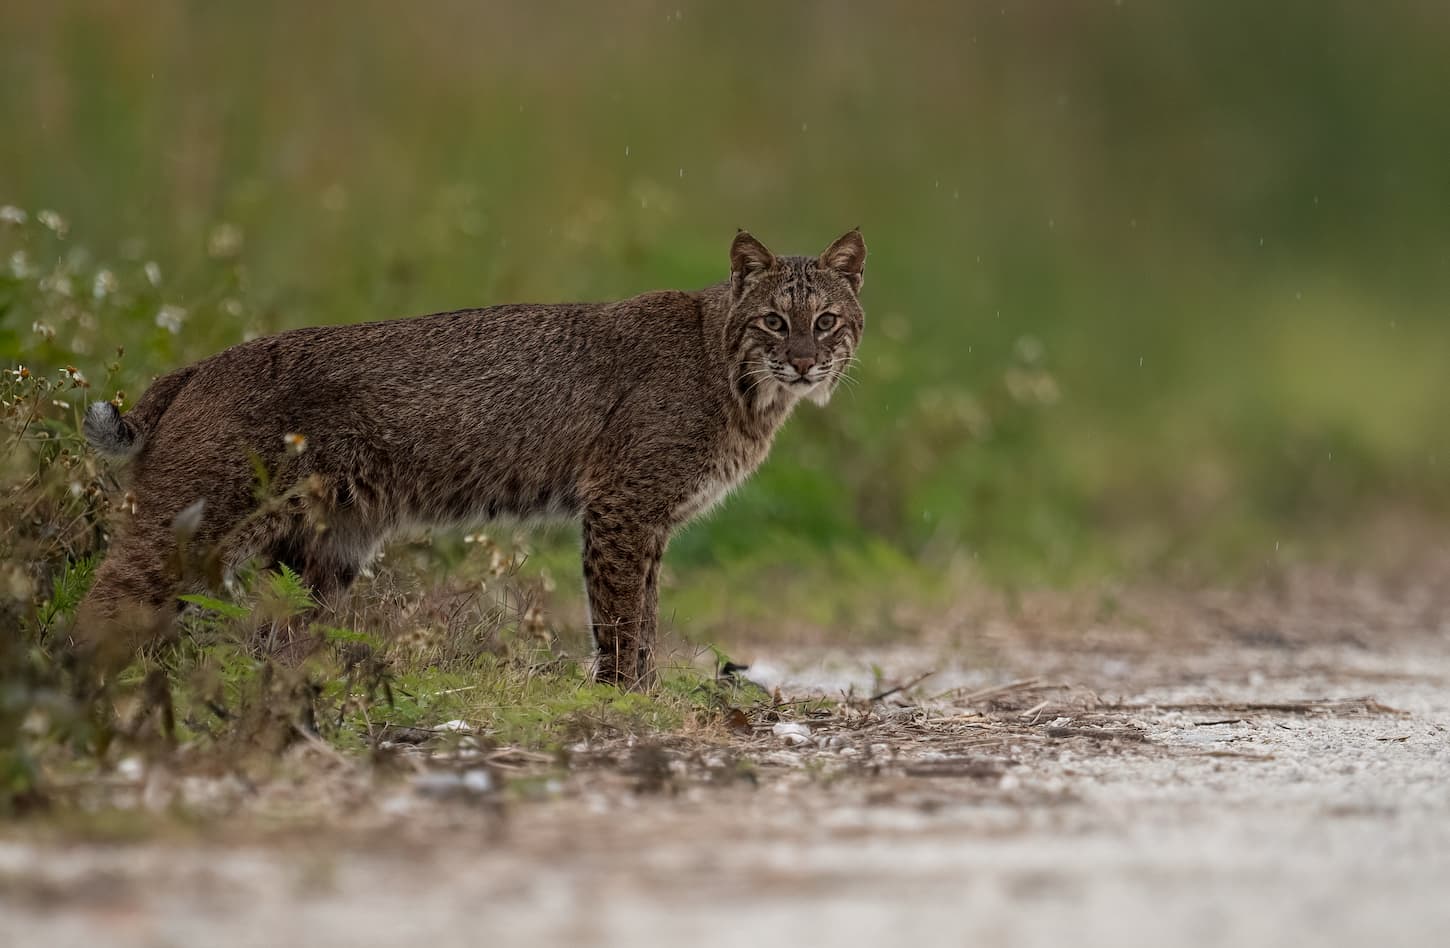 An image of a bobcat in a grass background looking at the camera.